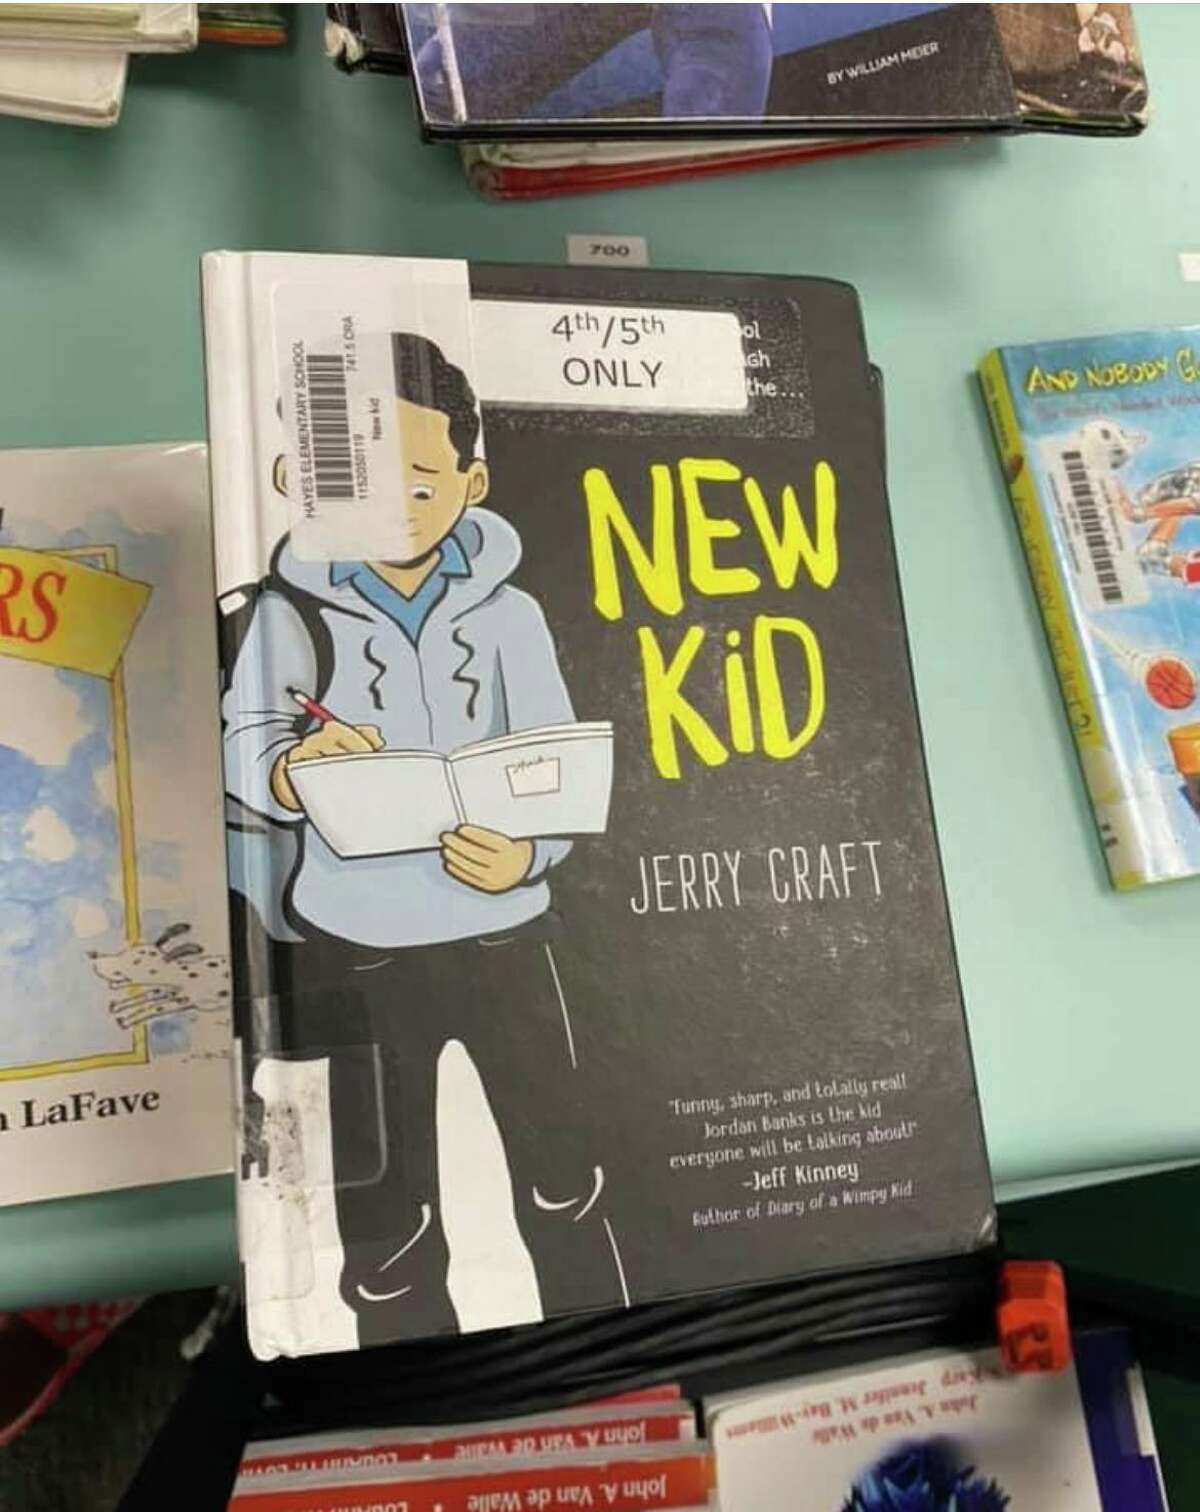 Jerry Craft's graphic novels are back on Katy ISD library shelves after a review committee found the claims against them baseless.